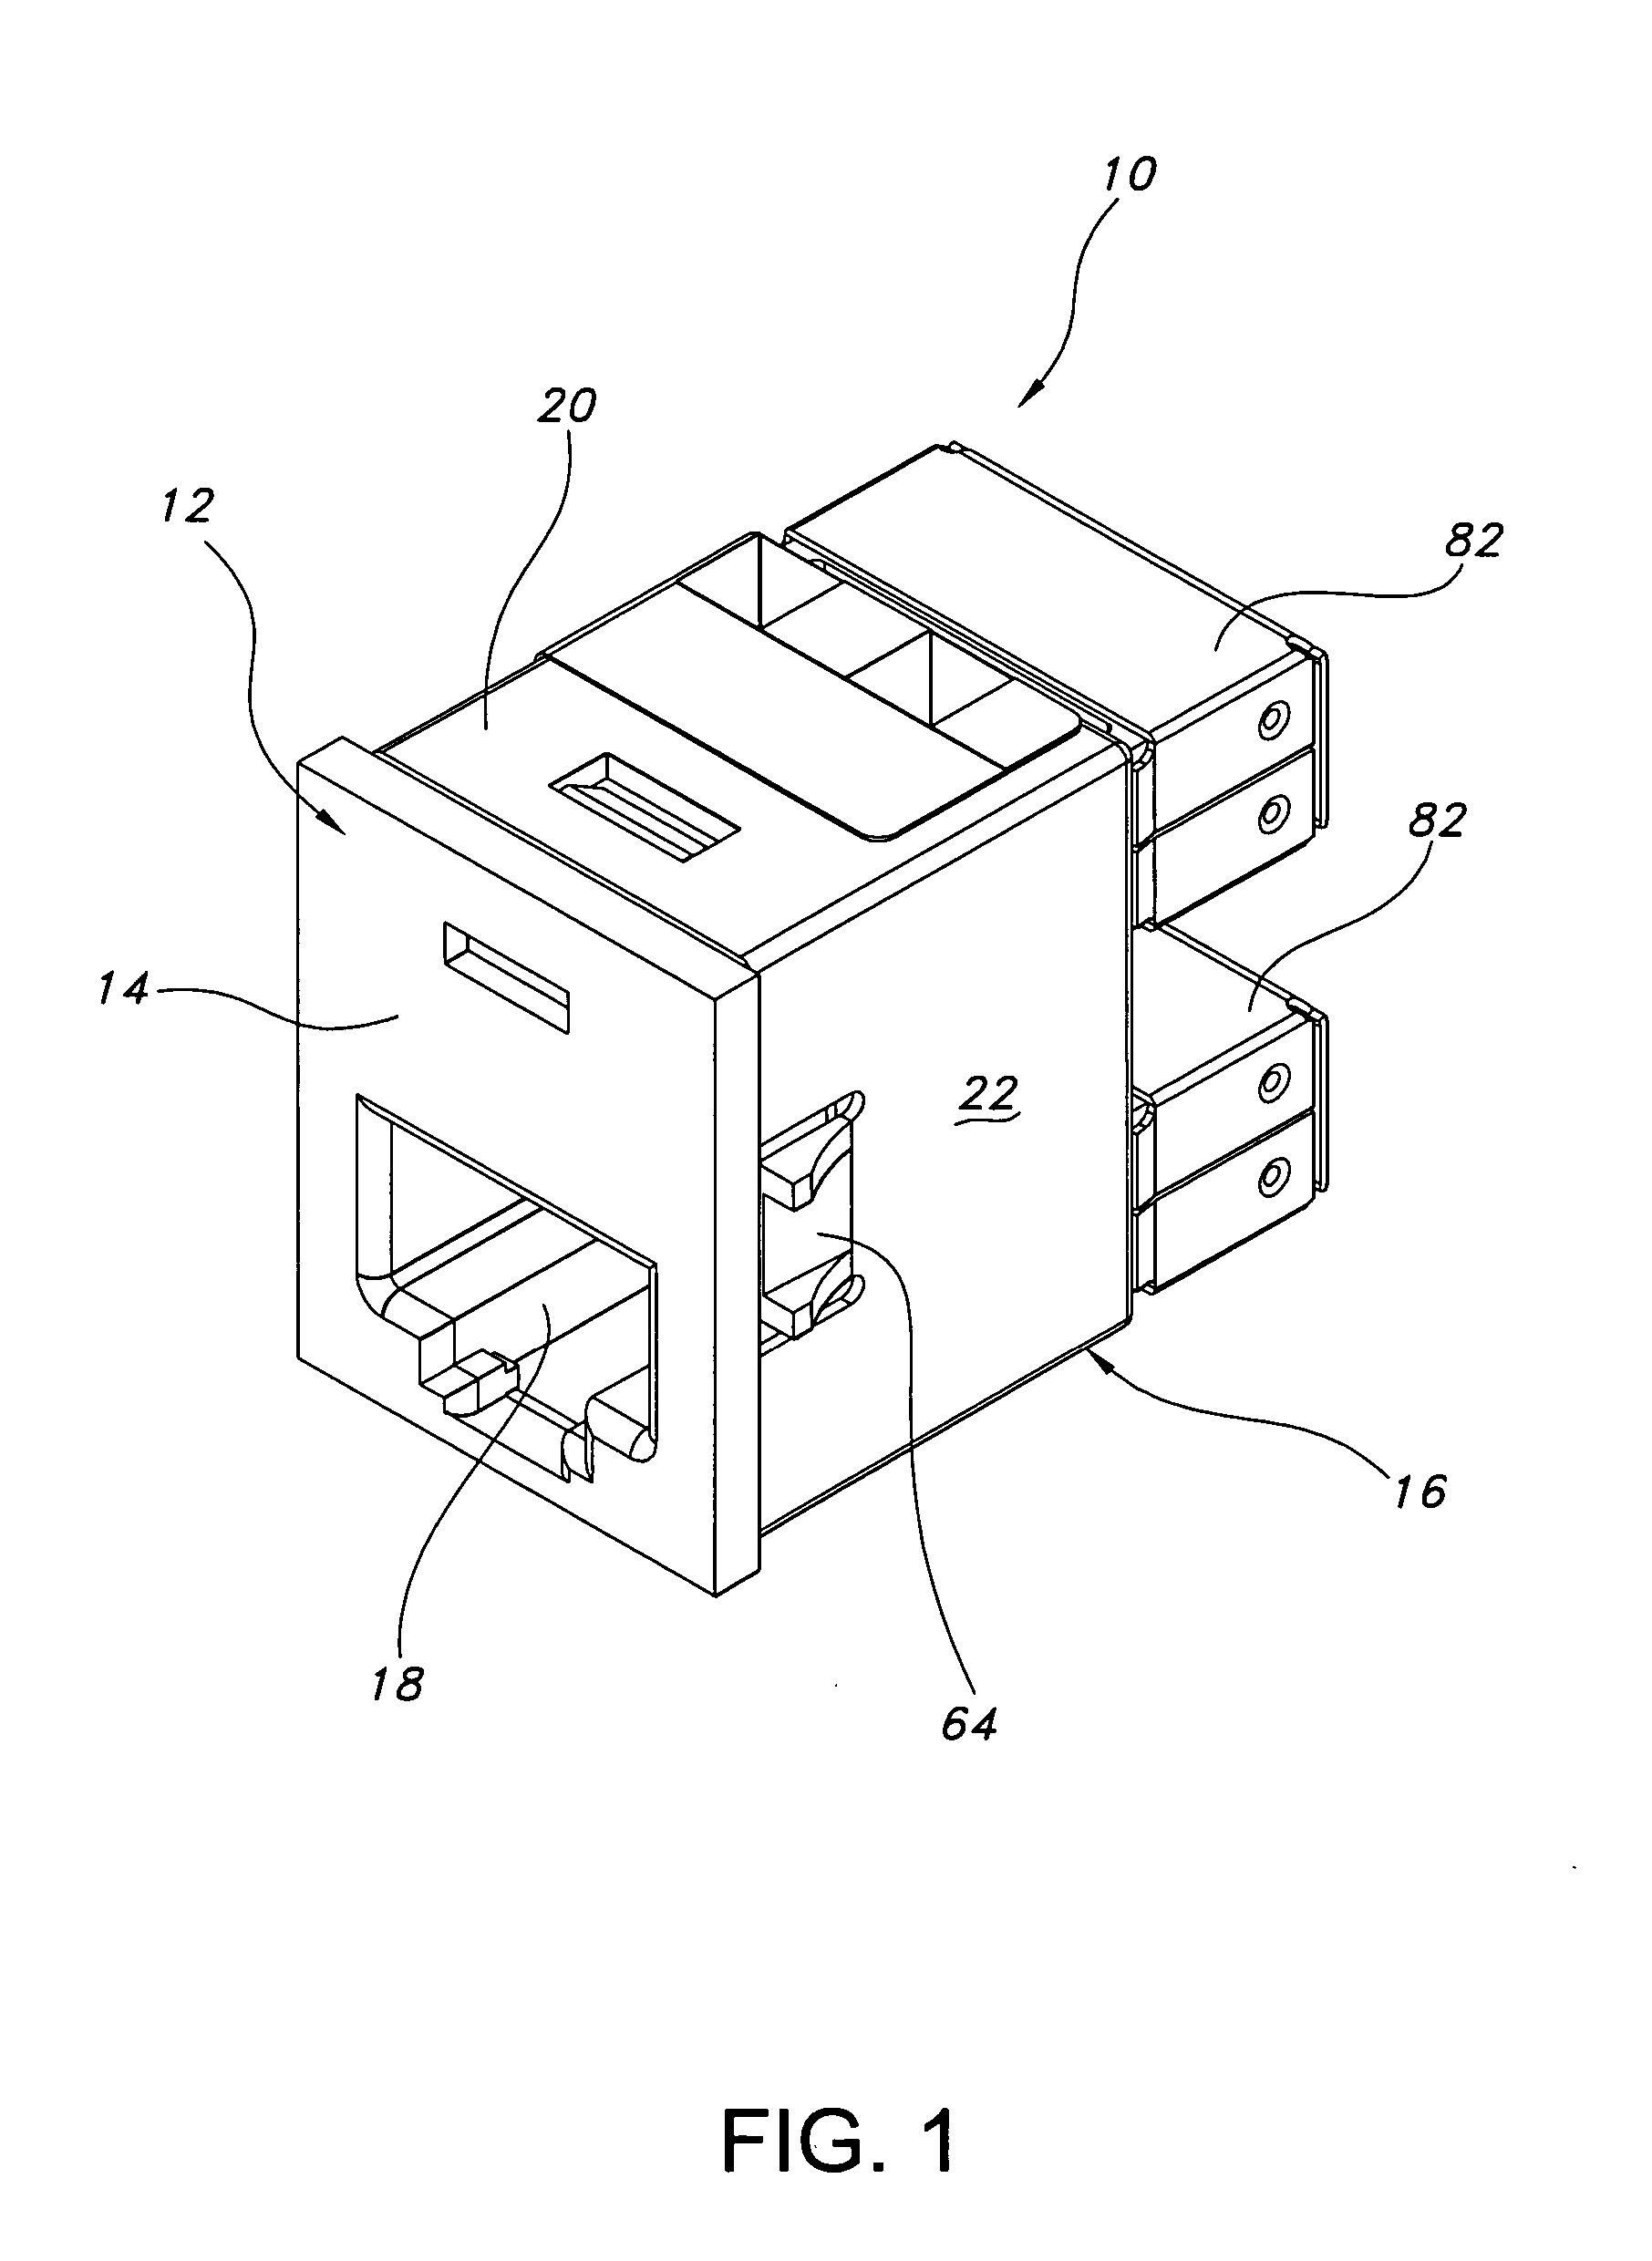 Electrically isolated shielded connector system